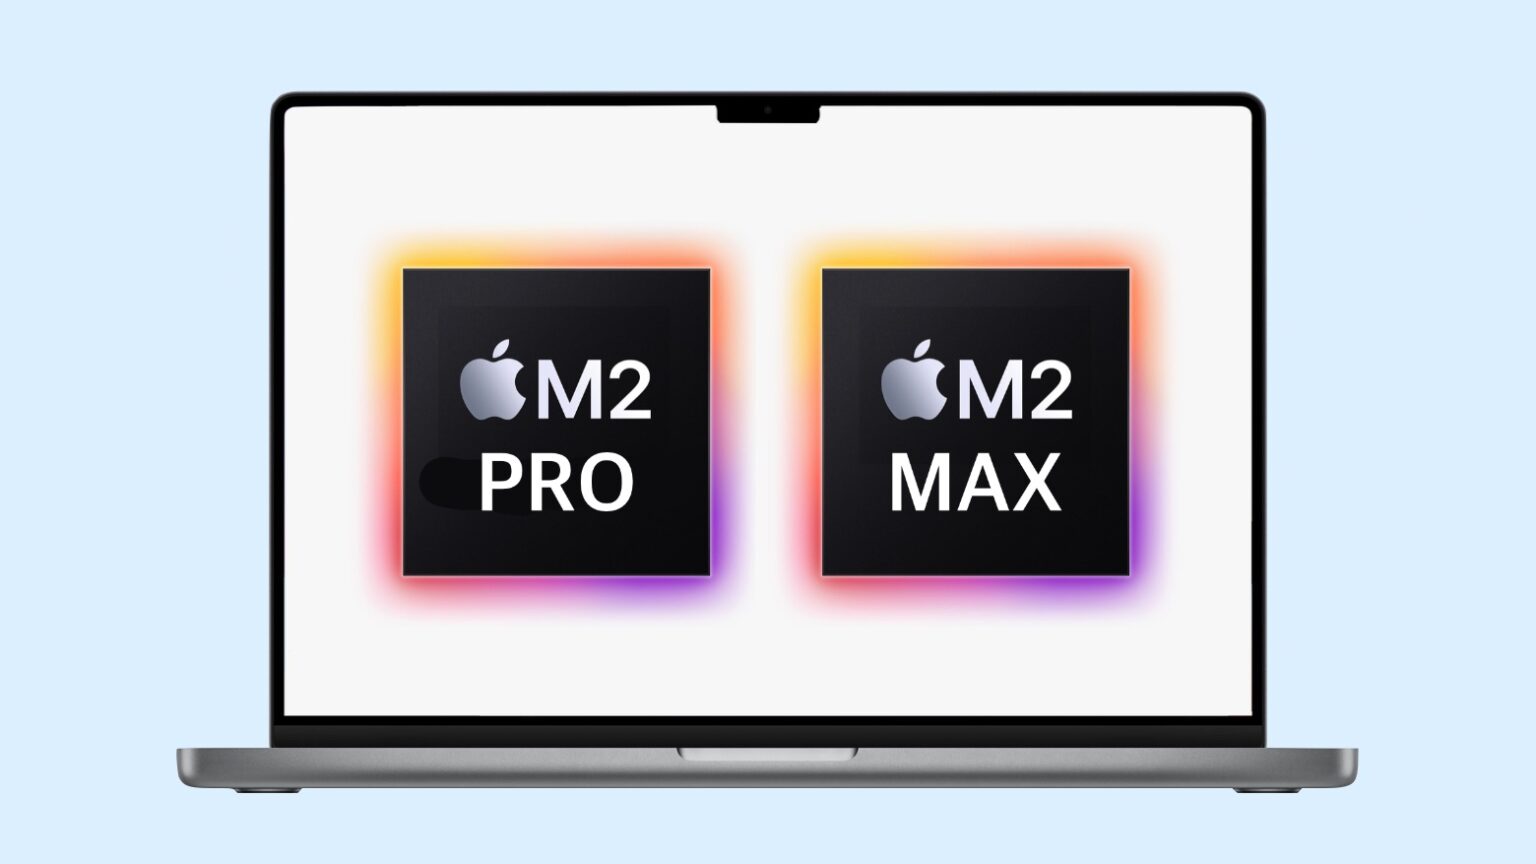 What we're expecting from 2022 MacBook Pro with M2 Pro or M2 Max